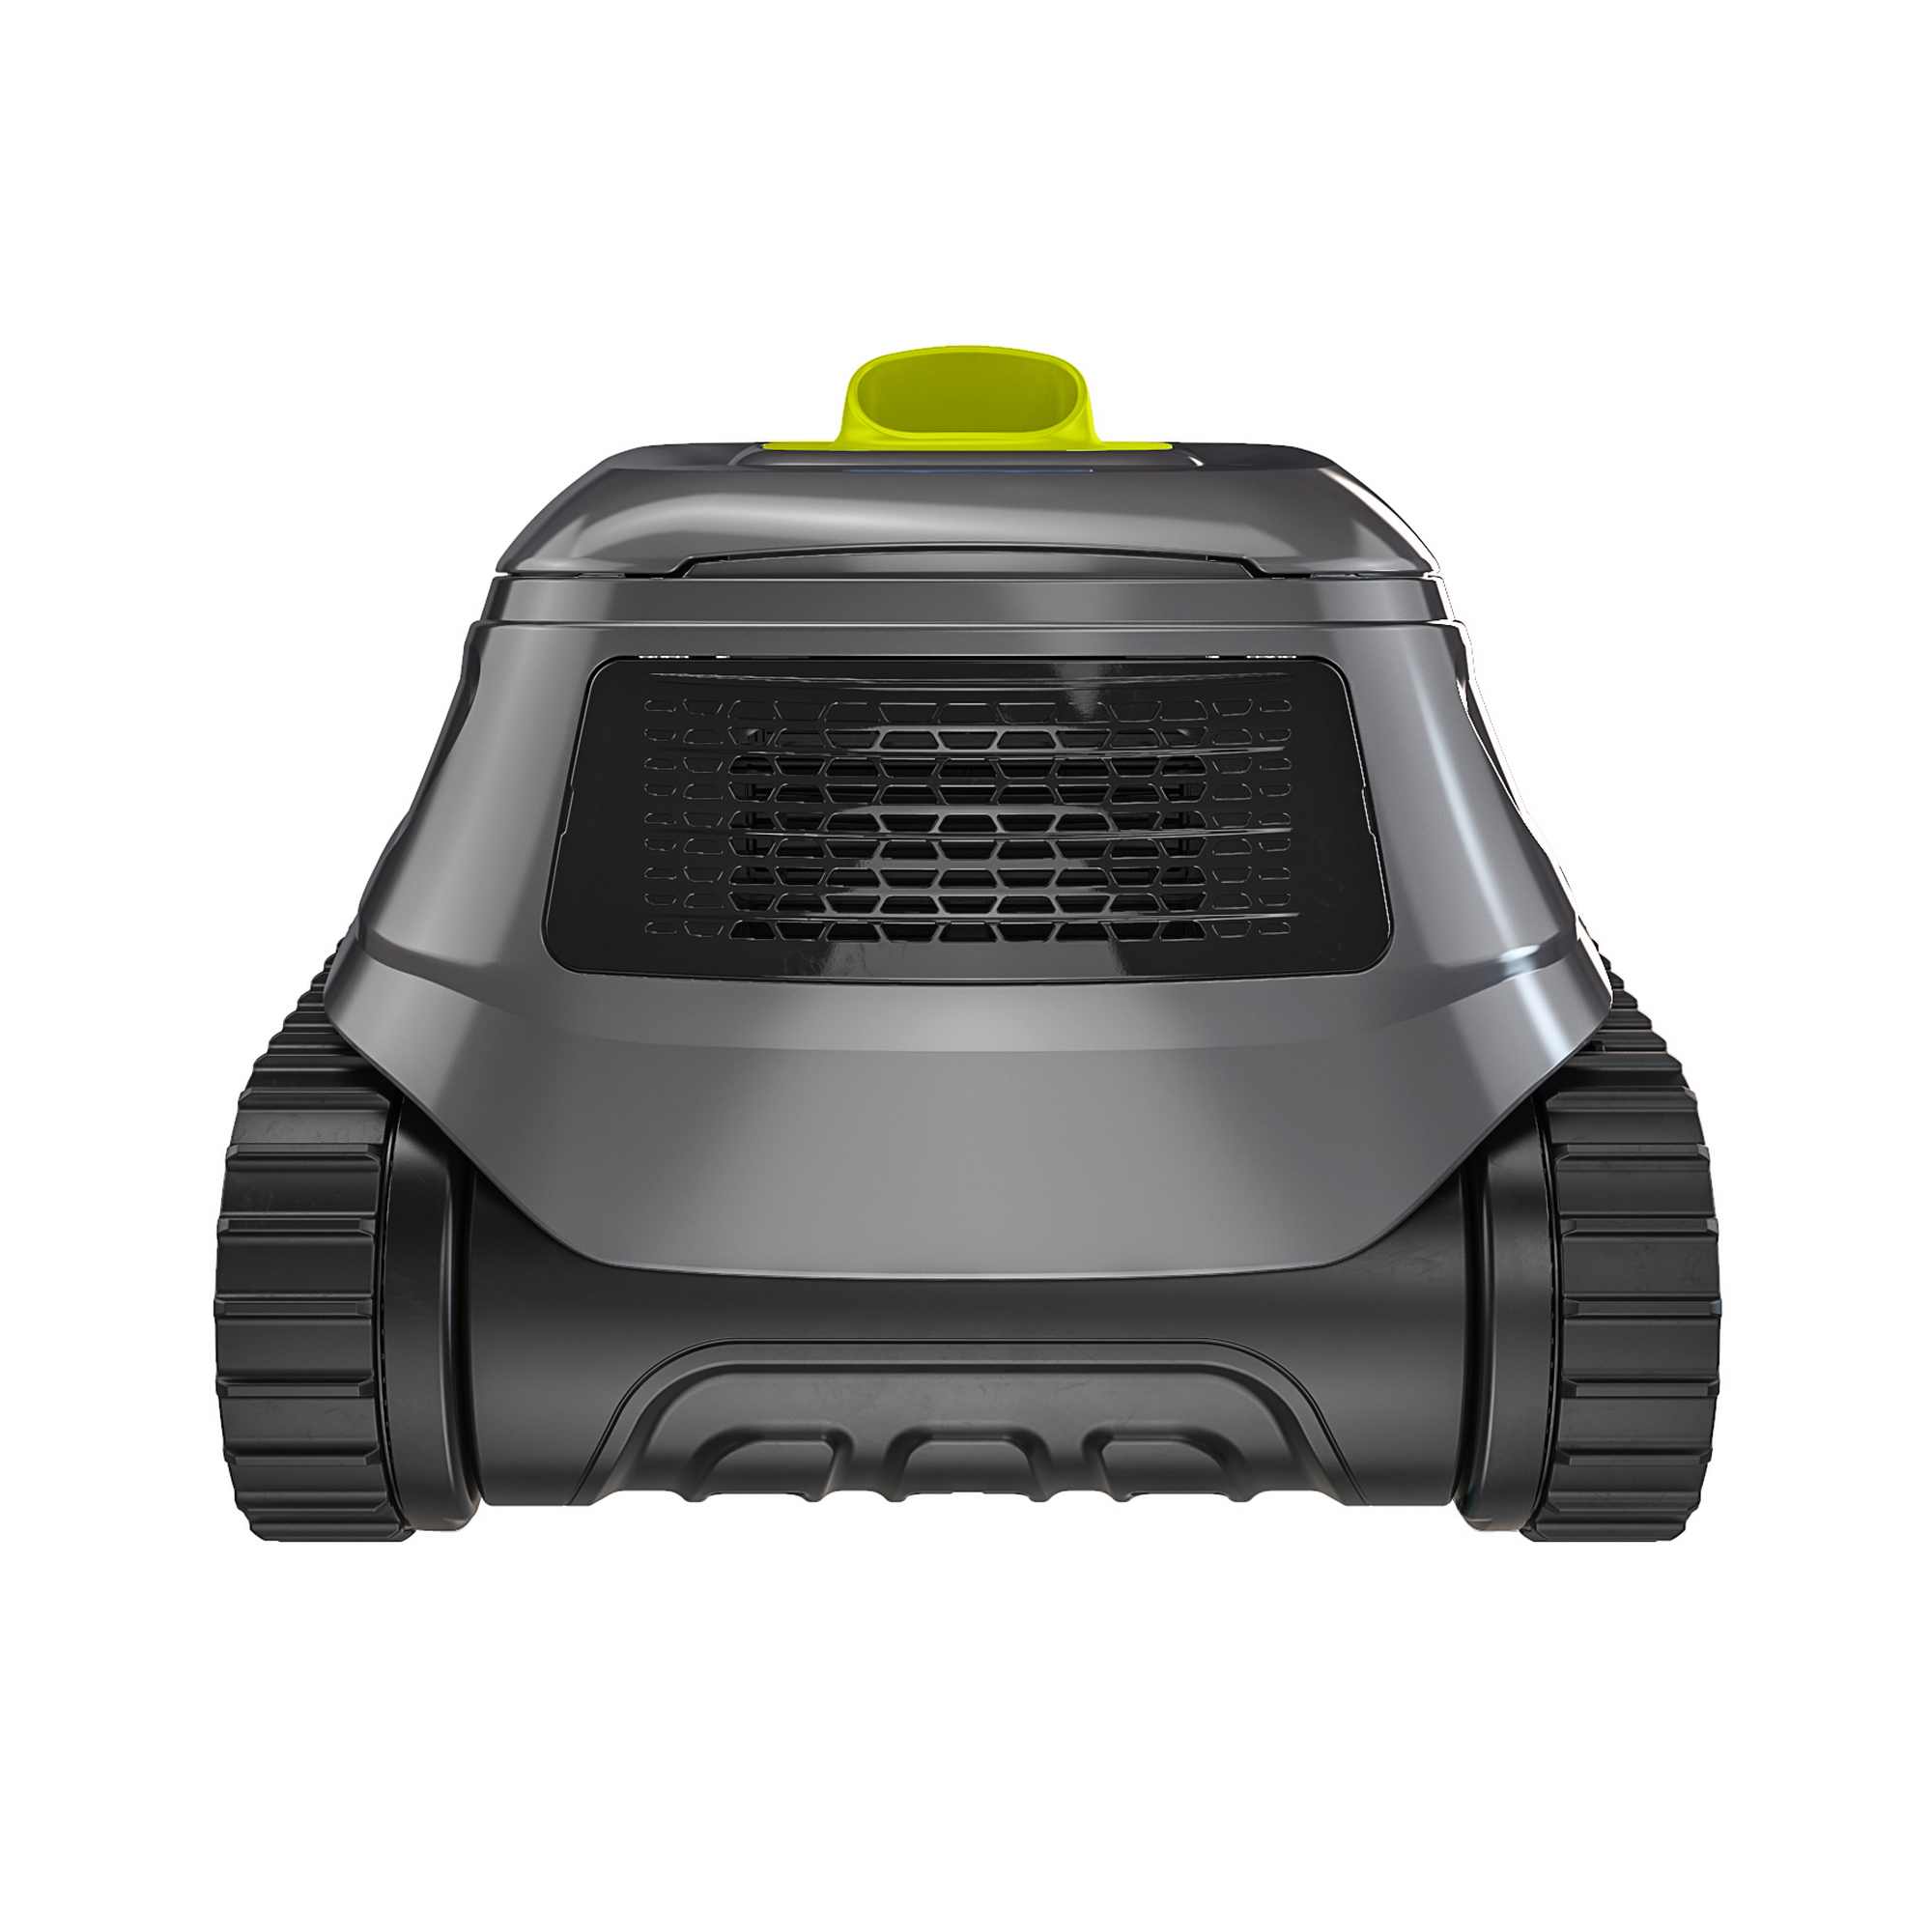 Poolroboter 'CNX1020' grau + product picture